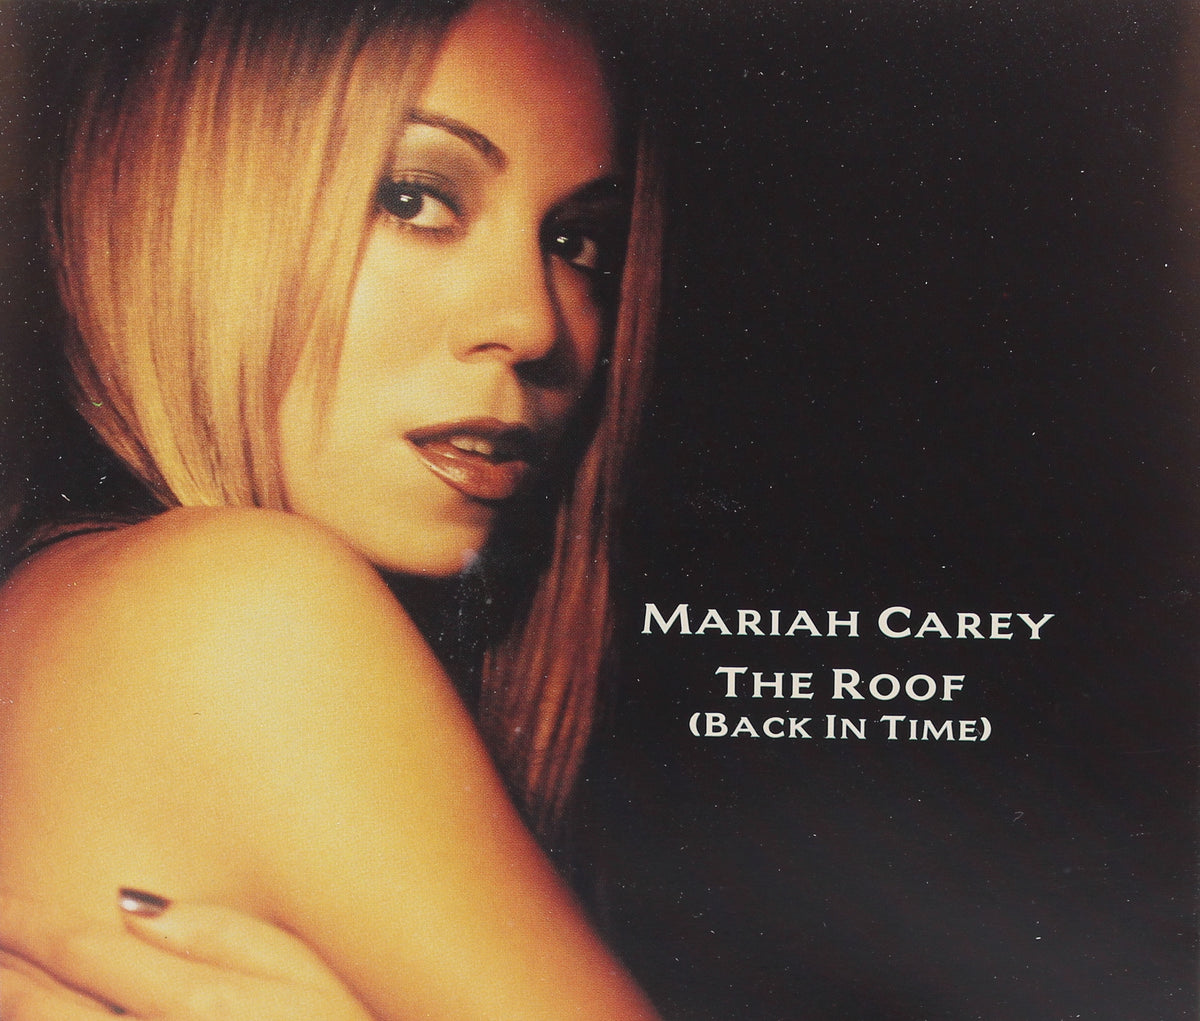 Mariah Carey, The Roof (Back In Time), CD Maxi Single Promo, UK 1998 (CD 663)